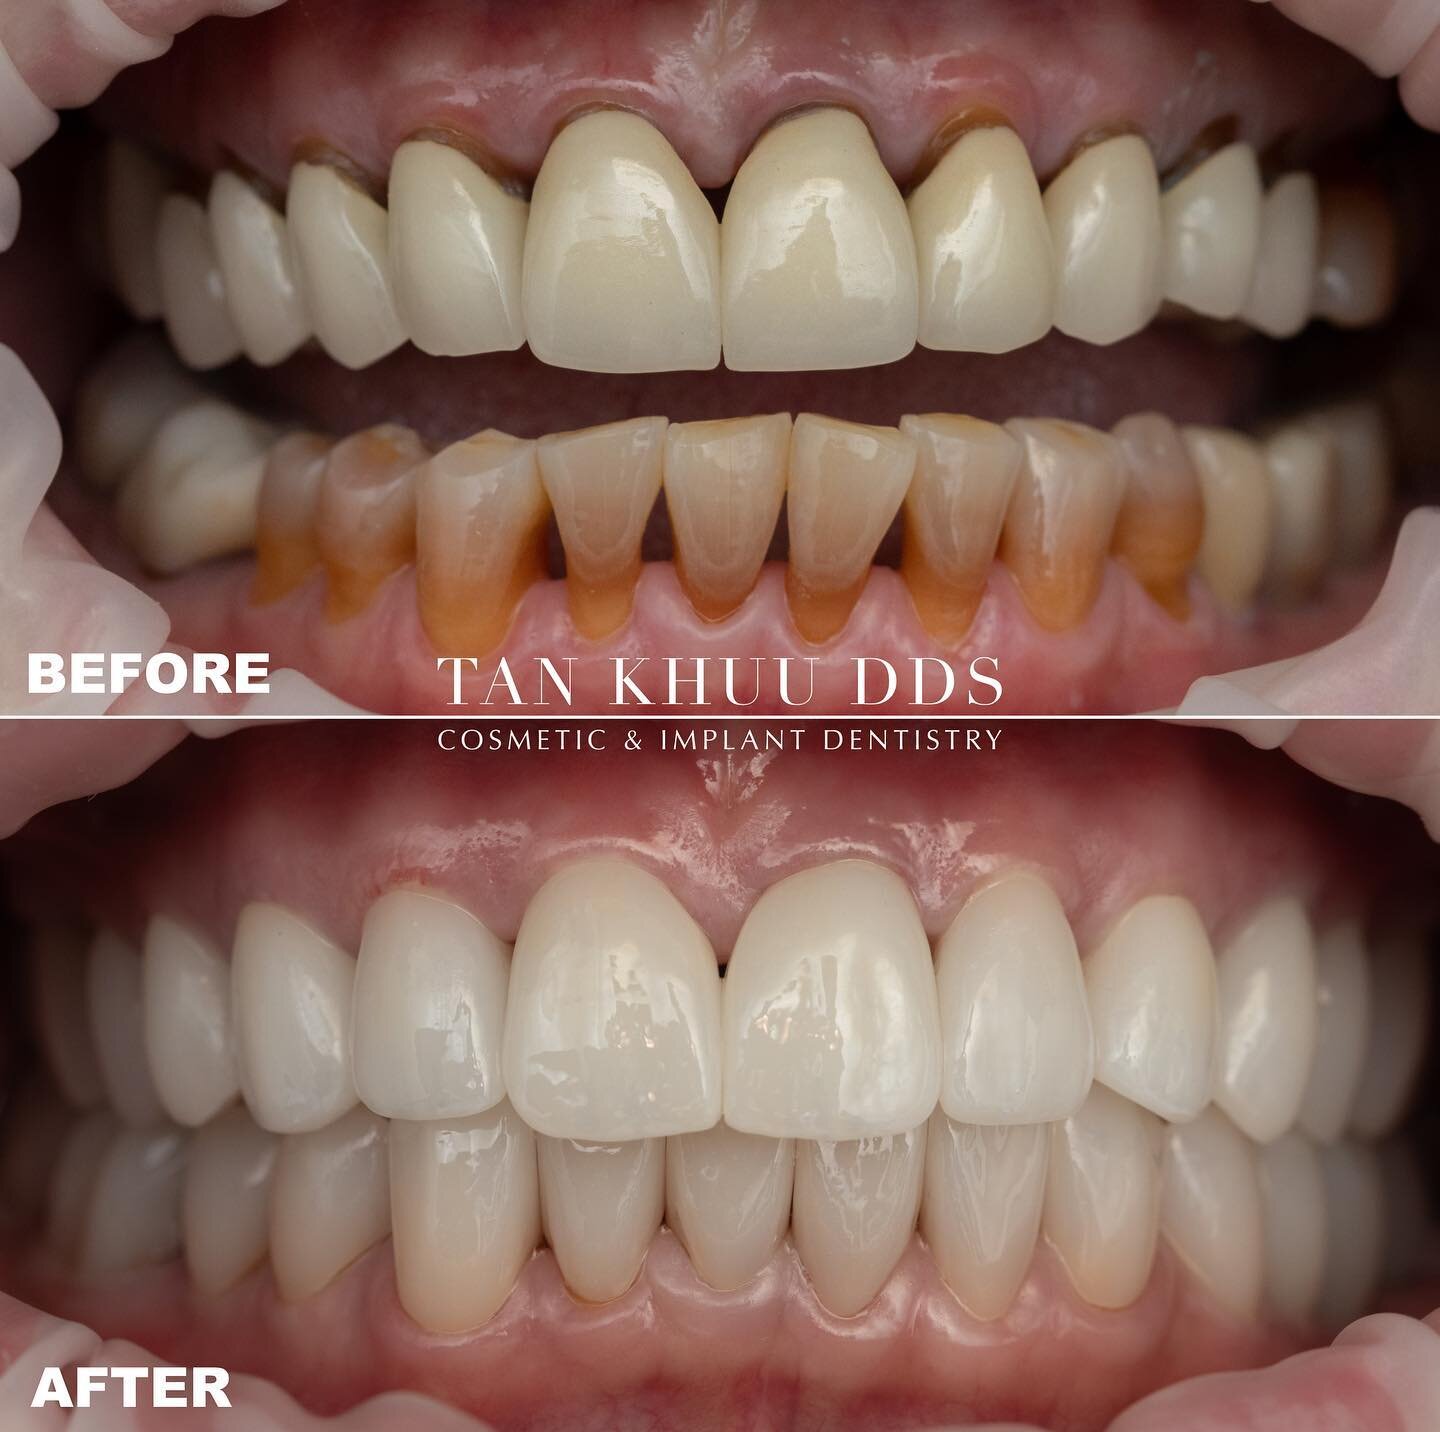 This patient came with cosmetic concerns, as well as concerns regarding the state of her existing crowns, all of which had recurrent decay at the margins after nearly 30 years of service. 

The patient was not happy with the esthetics of her current 